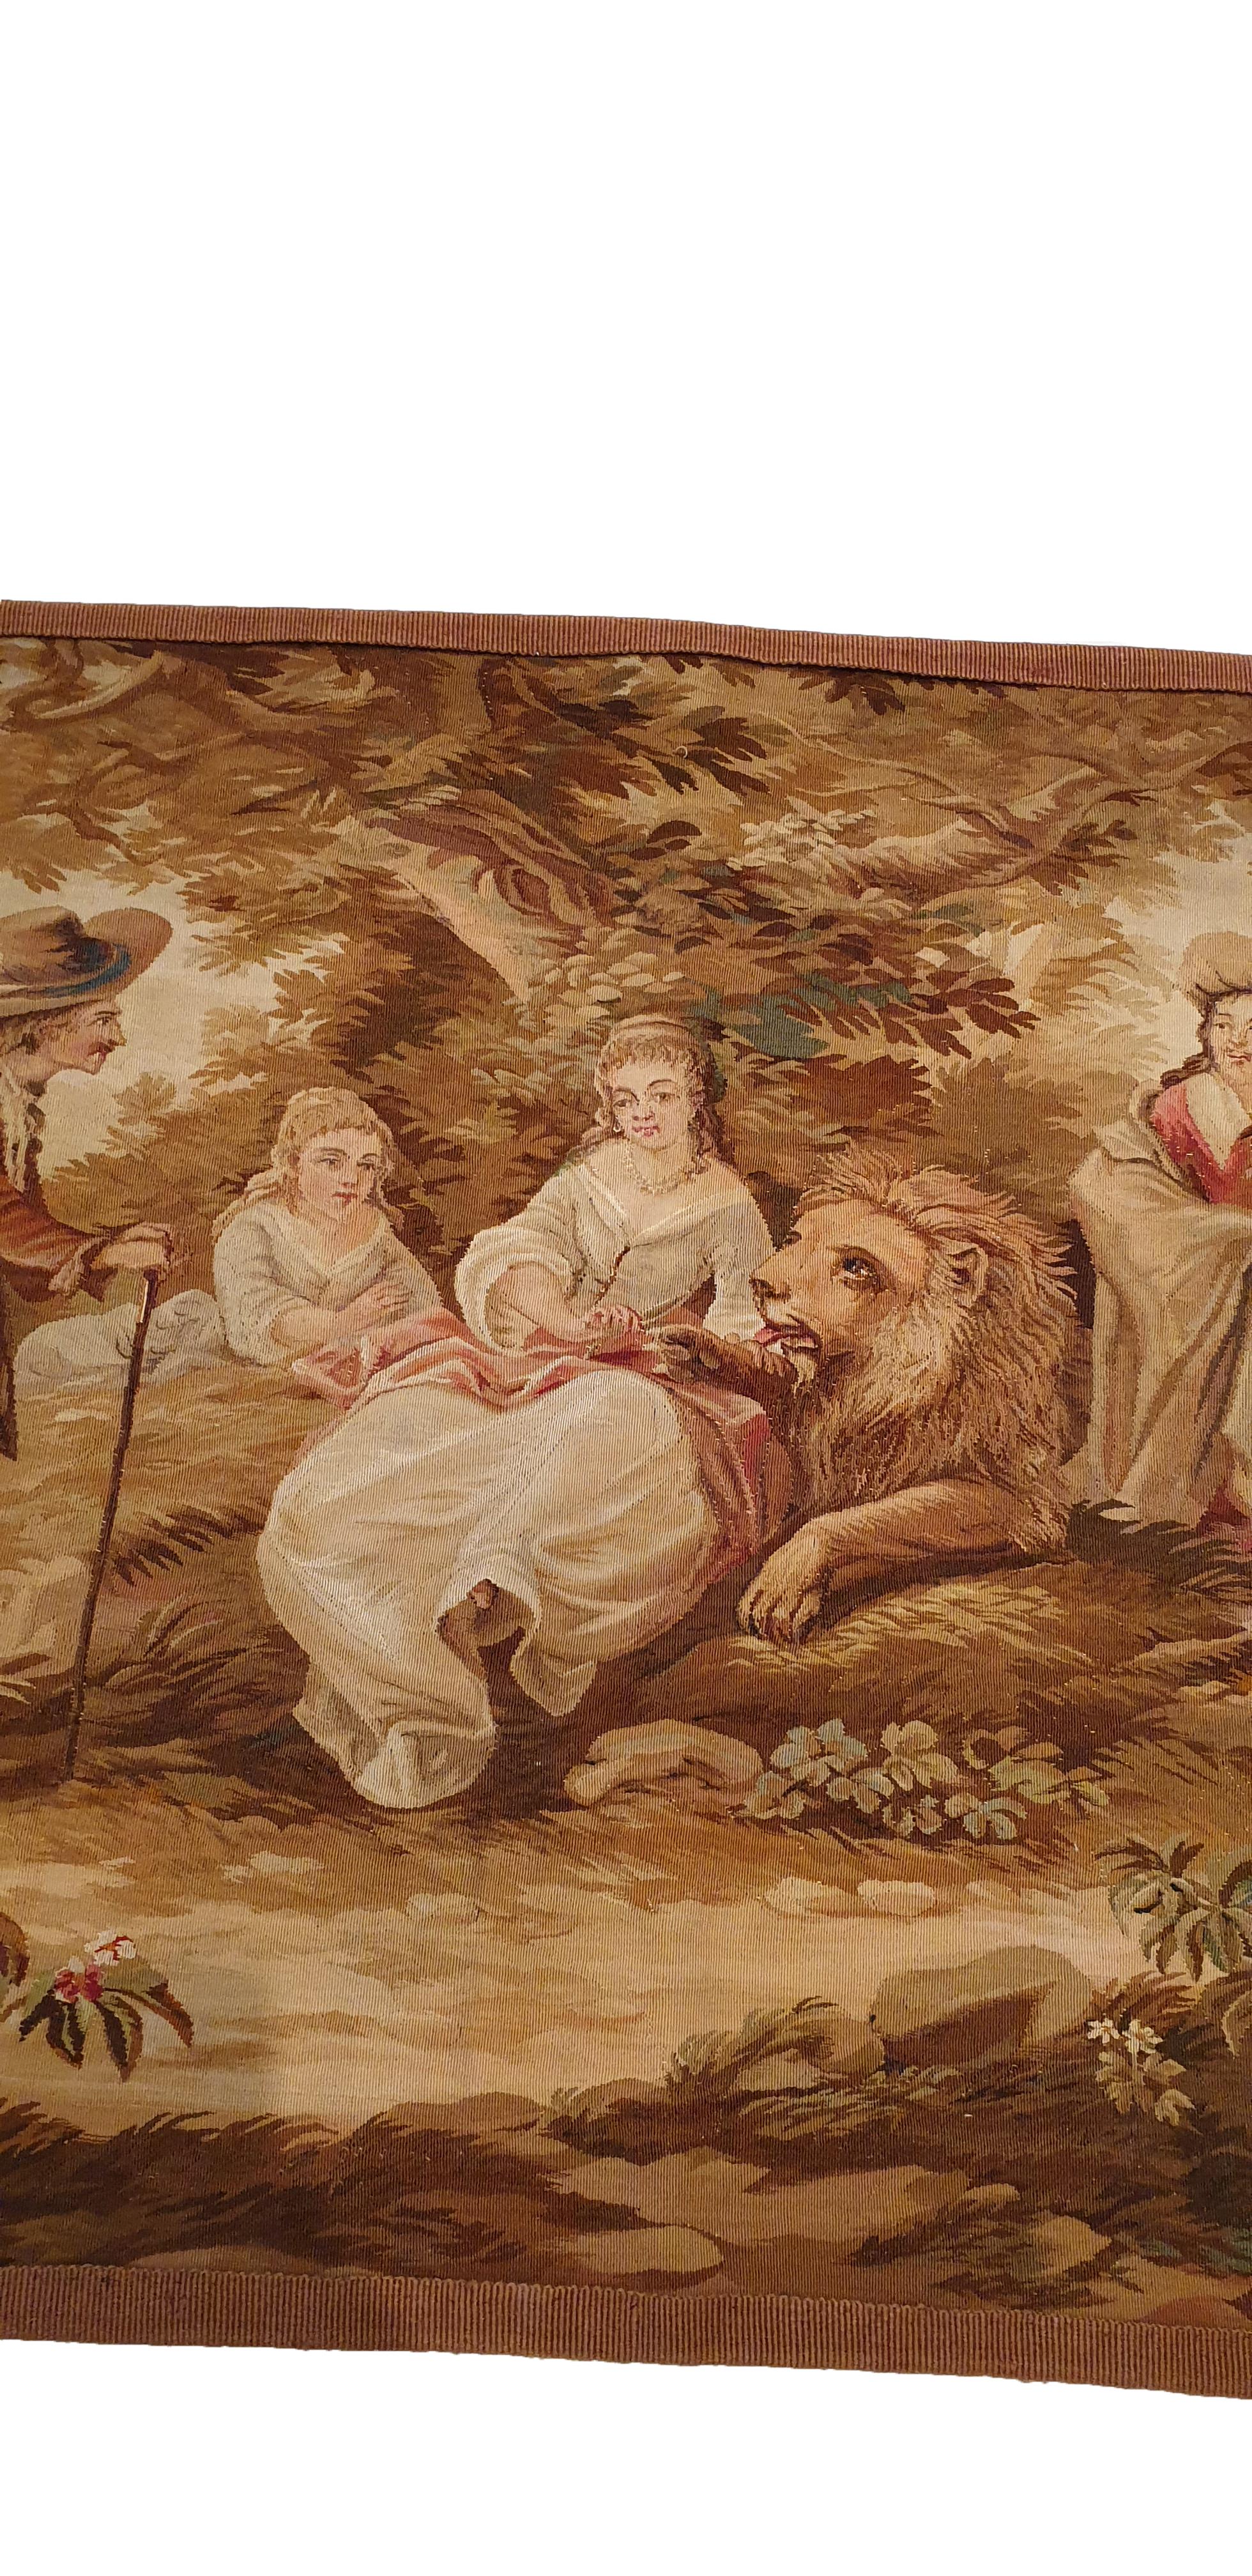 Hand-Woven  Tapestry Brussels, 19th Century - N° 704 For Sale